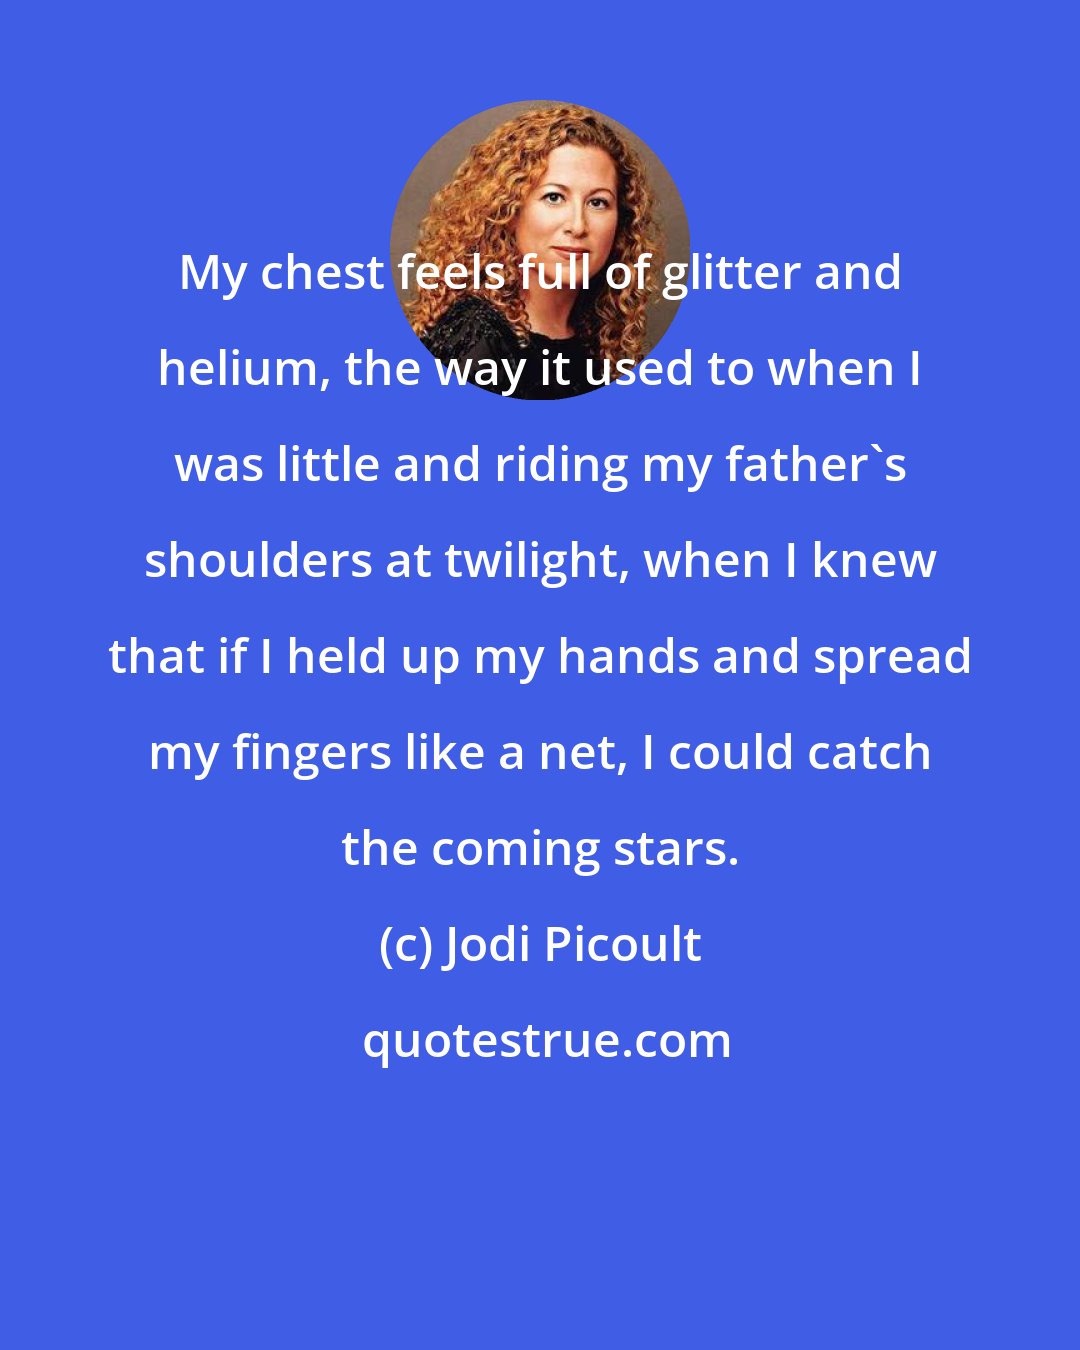 Jodi Picoult: My chest feels full of glitter and helium, the way it used to when I was little and riding my father's shoulders at twilight, when I knew that if I held up my hands and spread my fingers like a net, I could catch the coming stars.